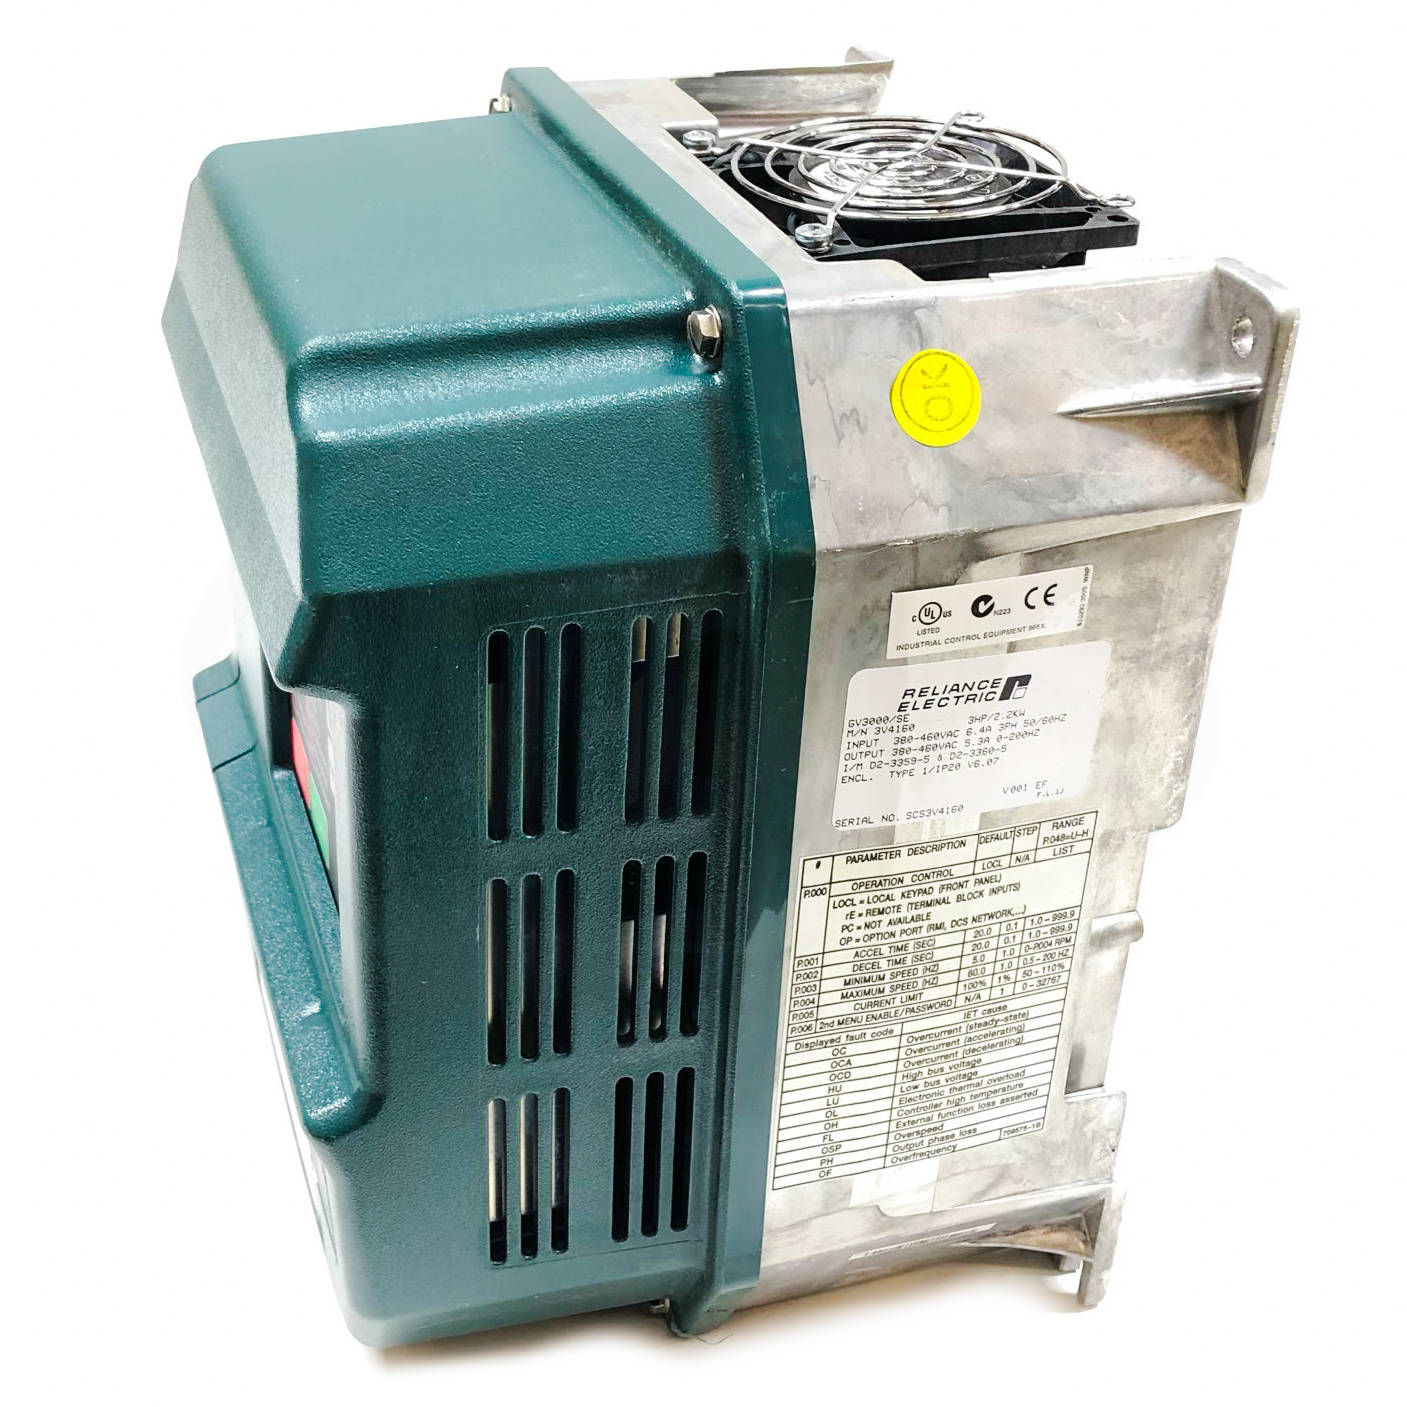 1SU21005 Reliance Electric SP500 3.5/5HP Variable Frequency Drive, 200-230VAC 4